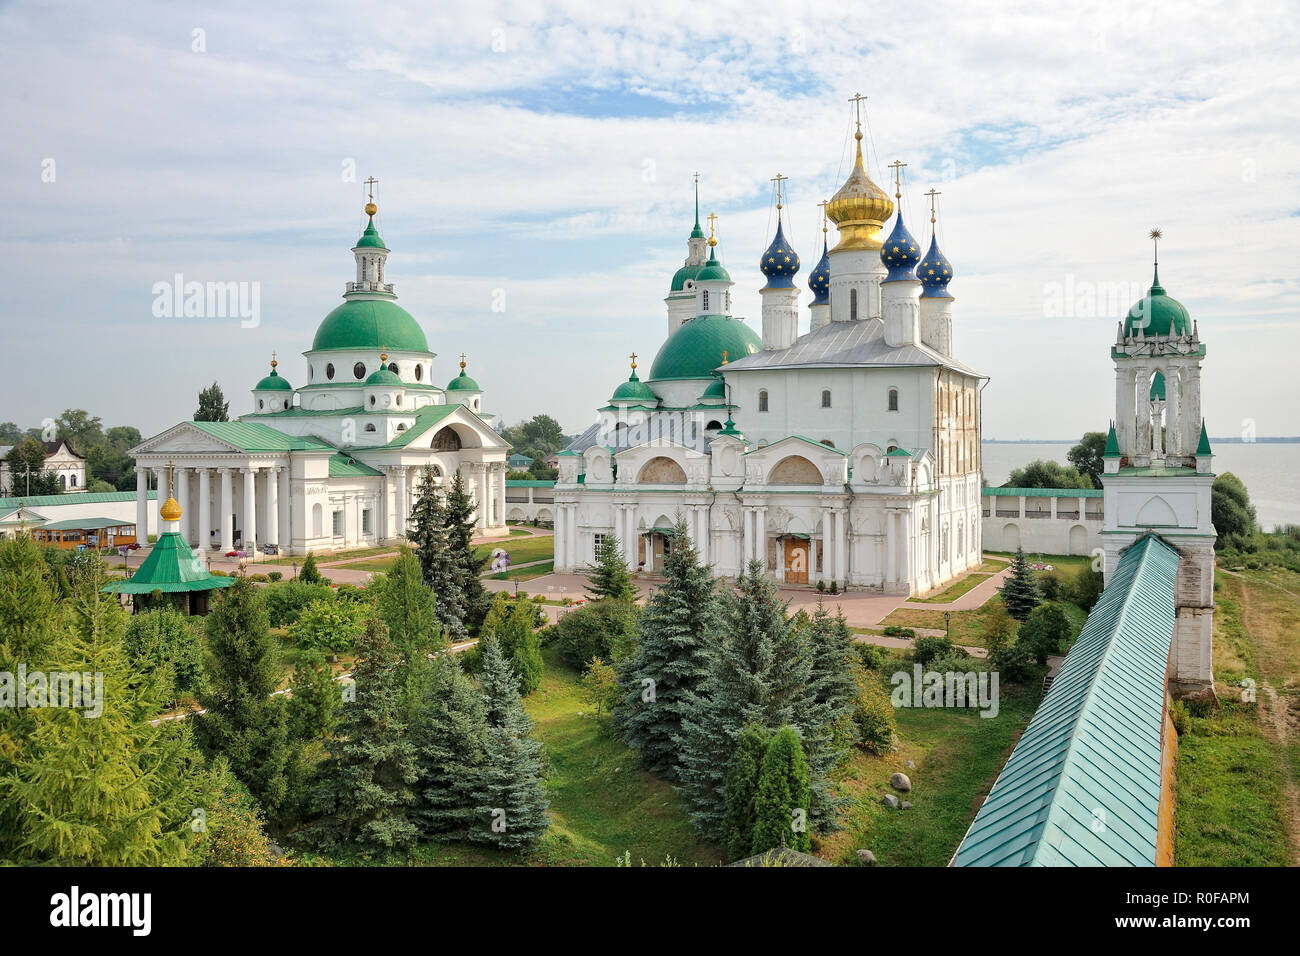 The Architectural Ensemble of Spaso-Yakovlevsky Monastery in a Cloudy Summer Day Stock Photo